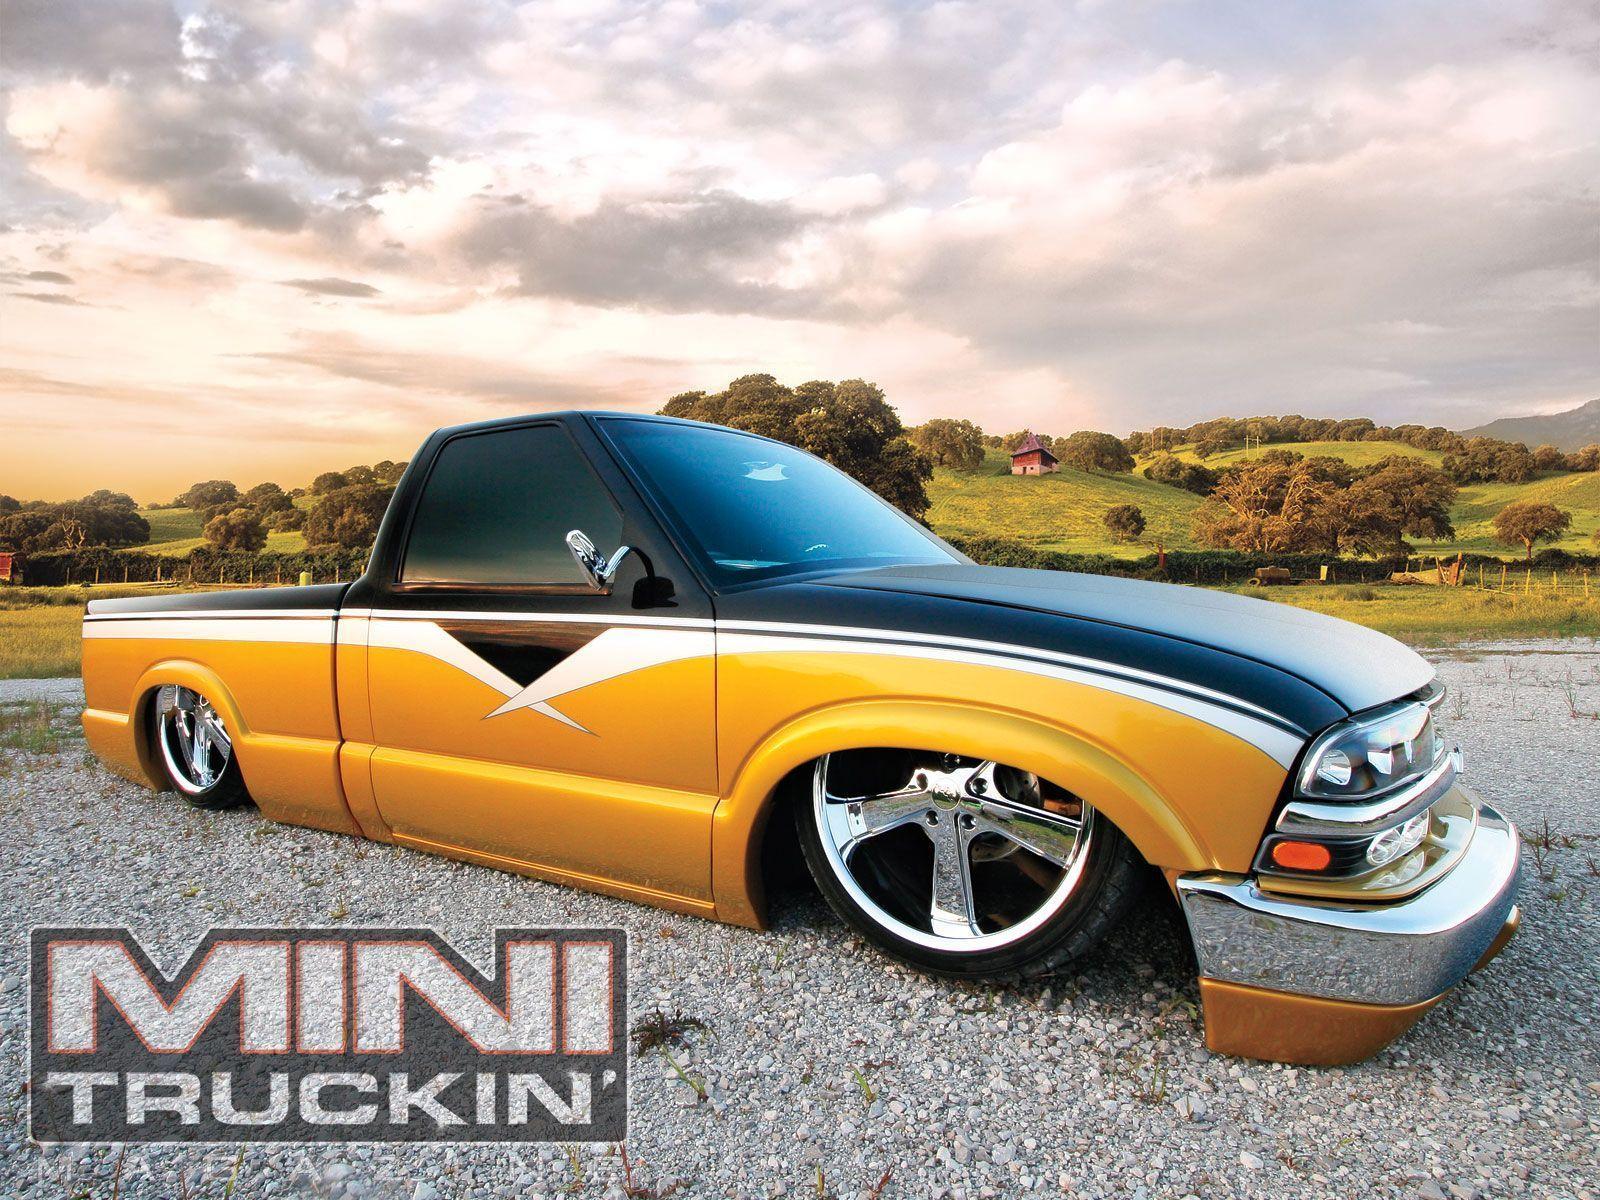 Mini Truckin Wallpaper December 2011 1999 Chevy S10 Front Angle